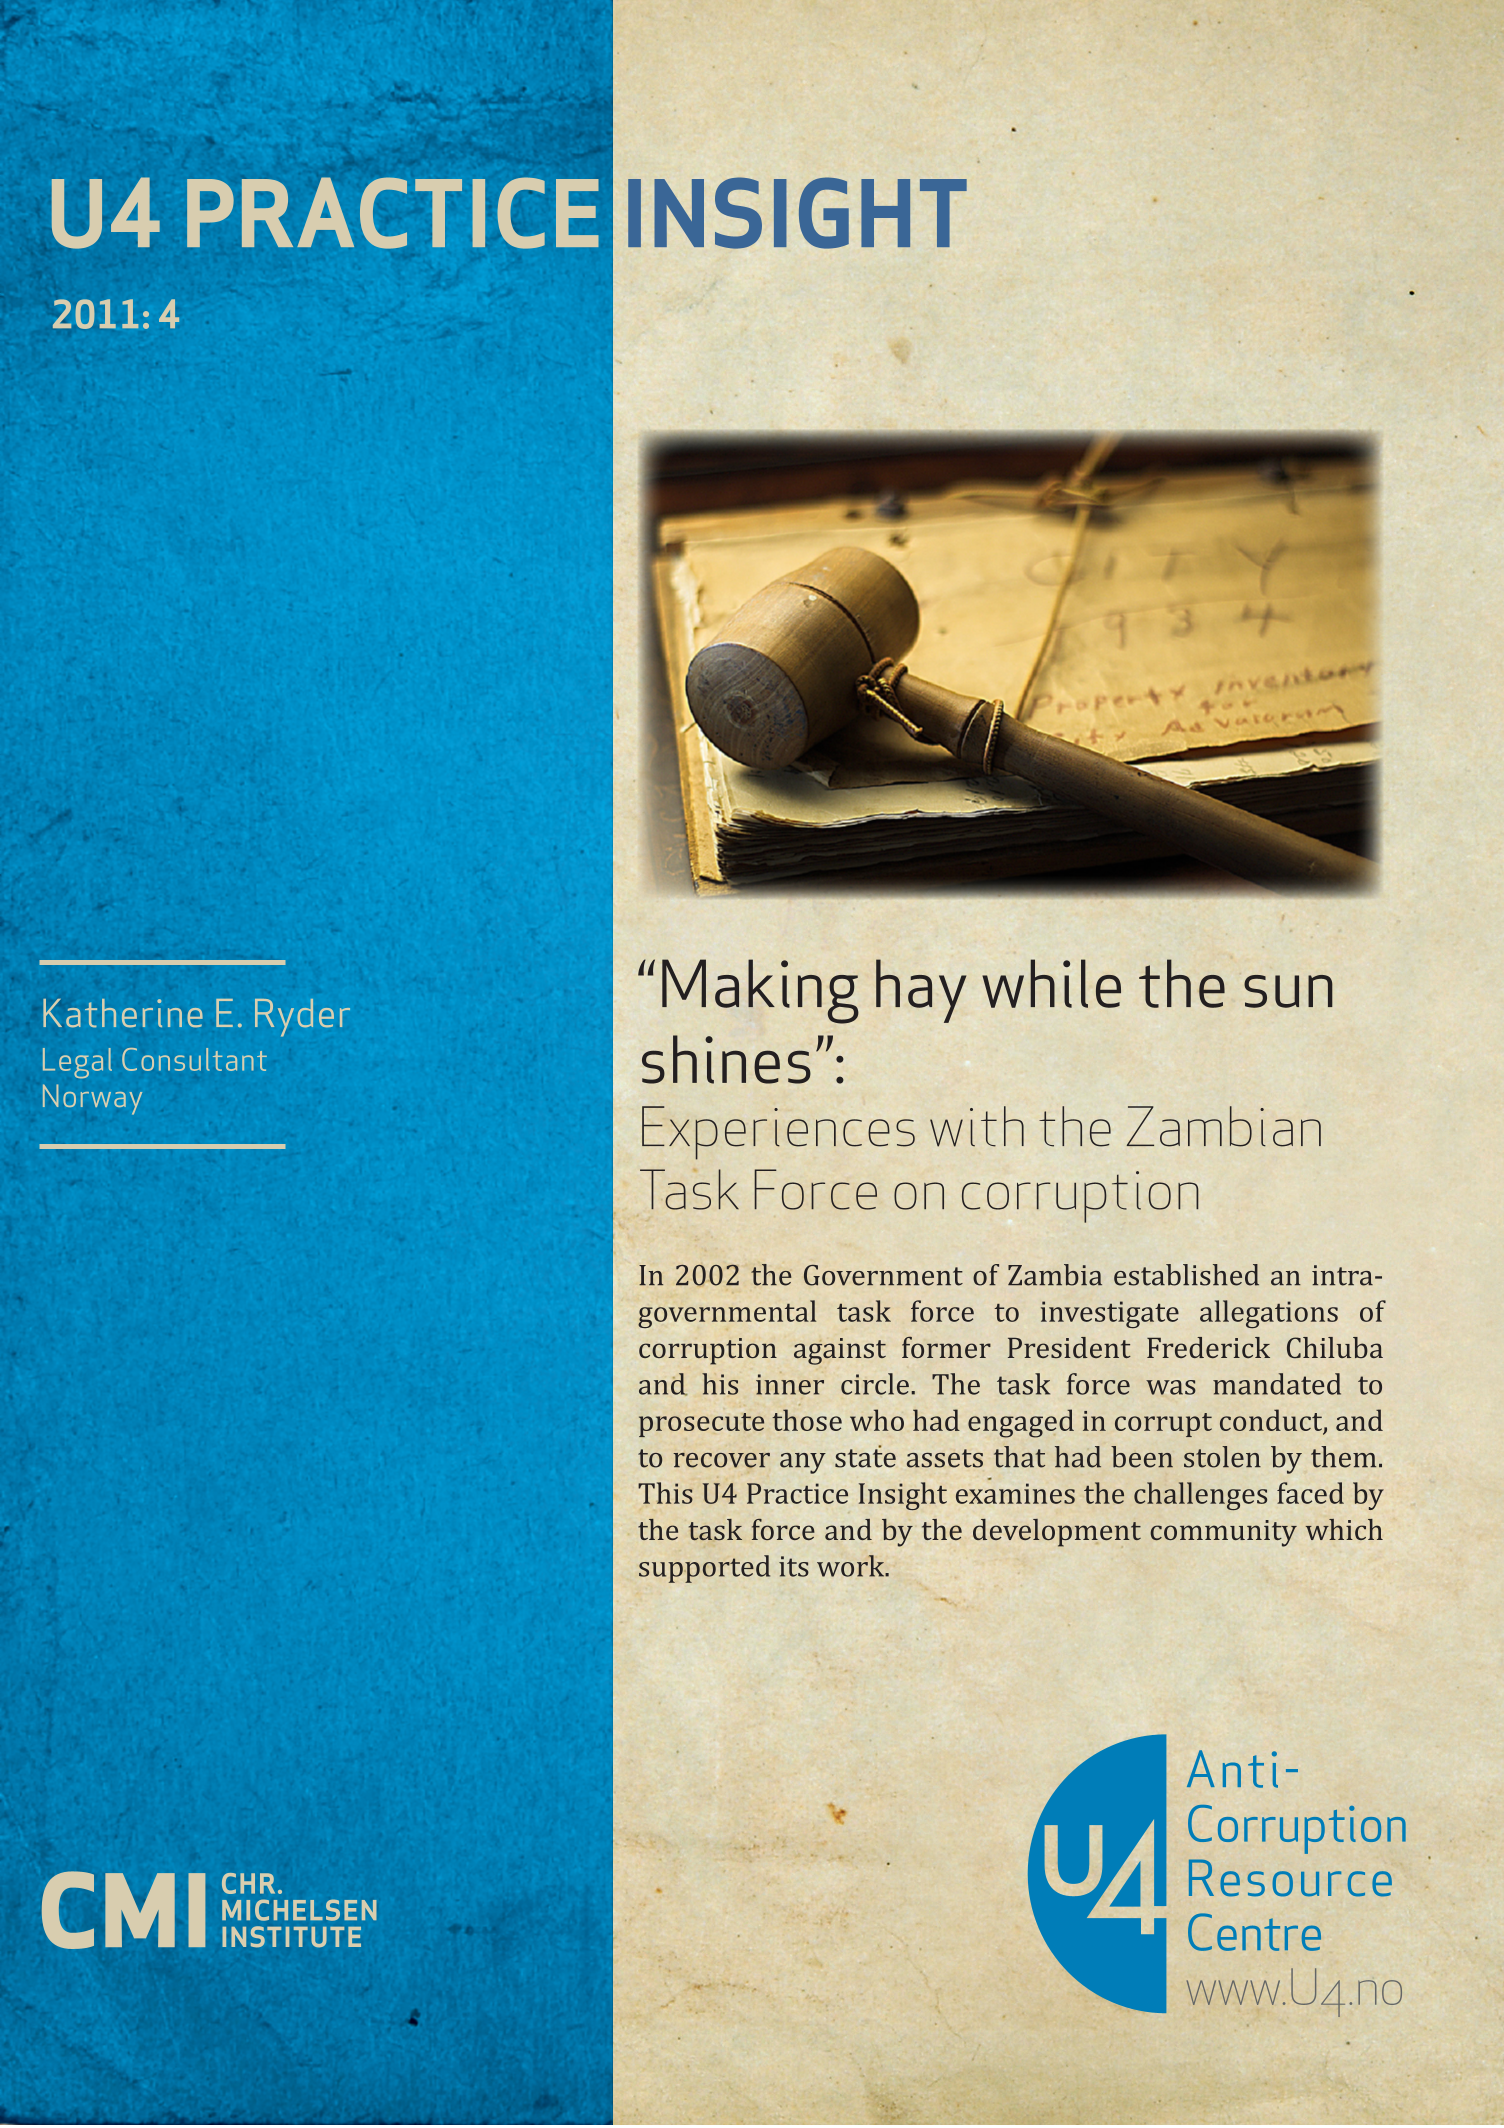 Making hay while the sun shines: Experiences with the Zambian Task Force on corruption